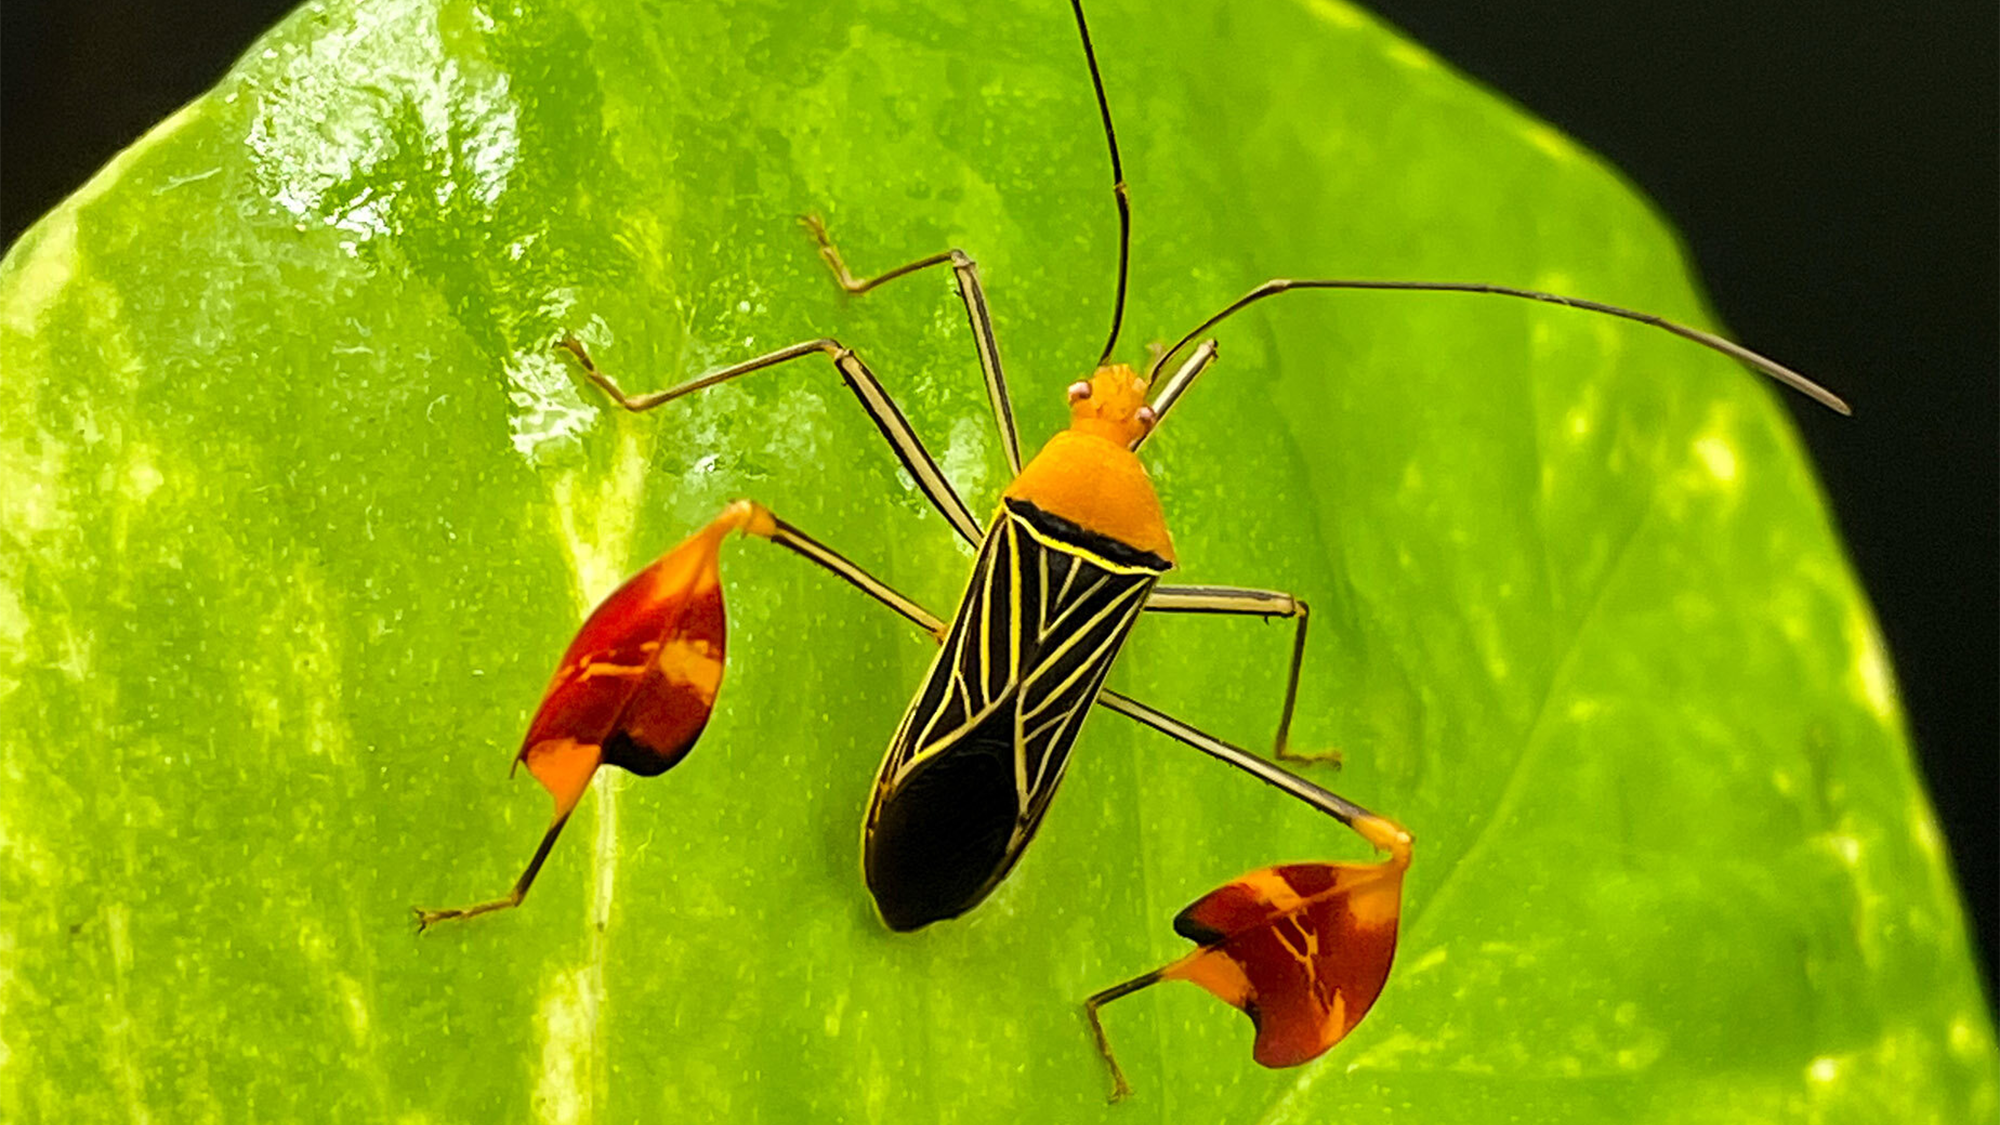 an insect called a matador bug on a green leaf. these bugs have red flag lookingsdecorations on their hind legs